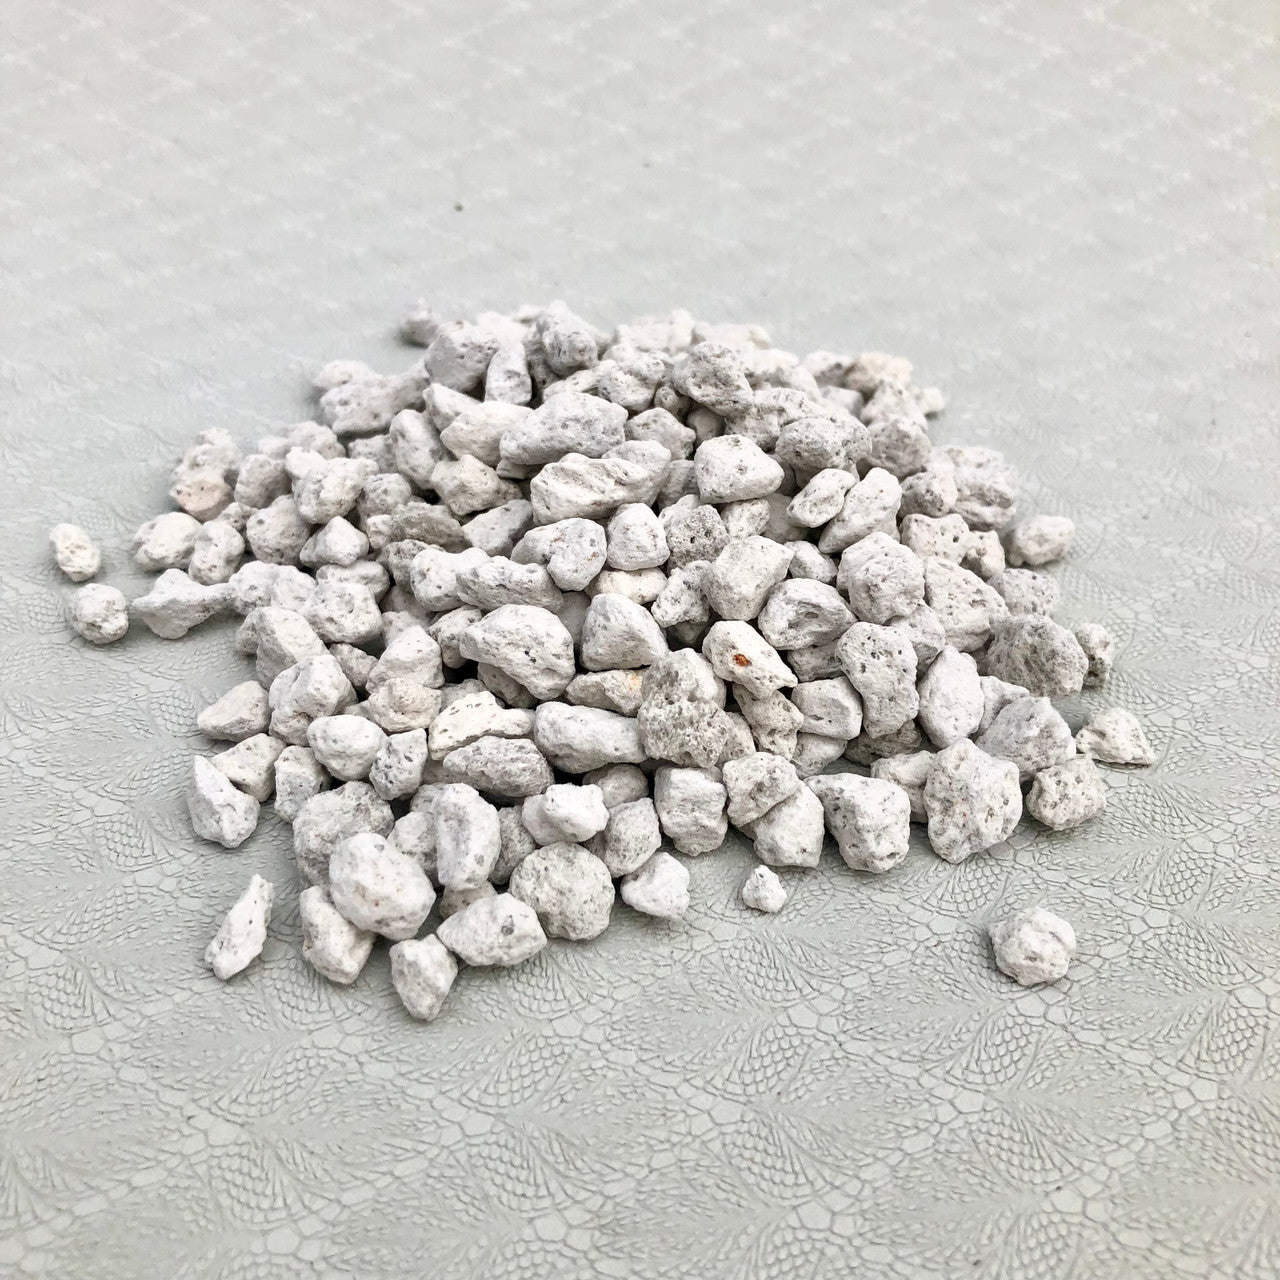 Loose pile of horticultural pumice